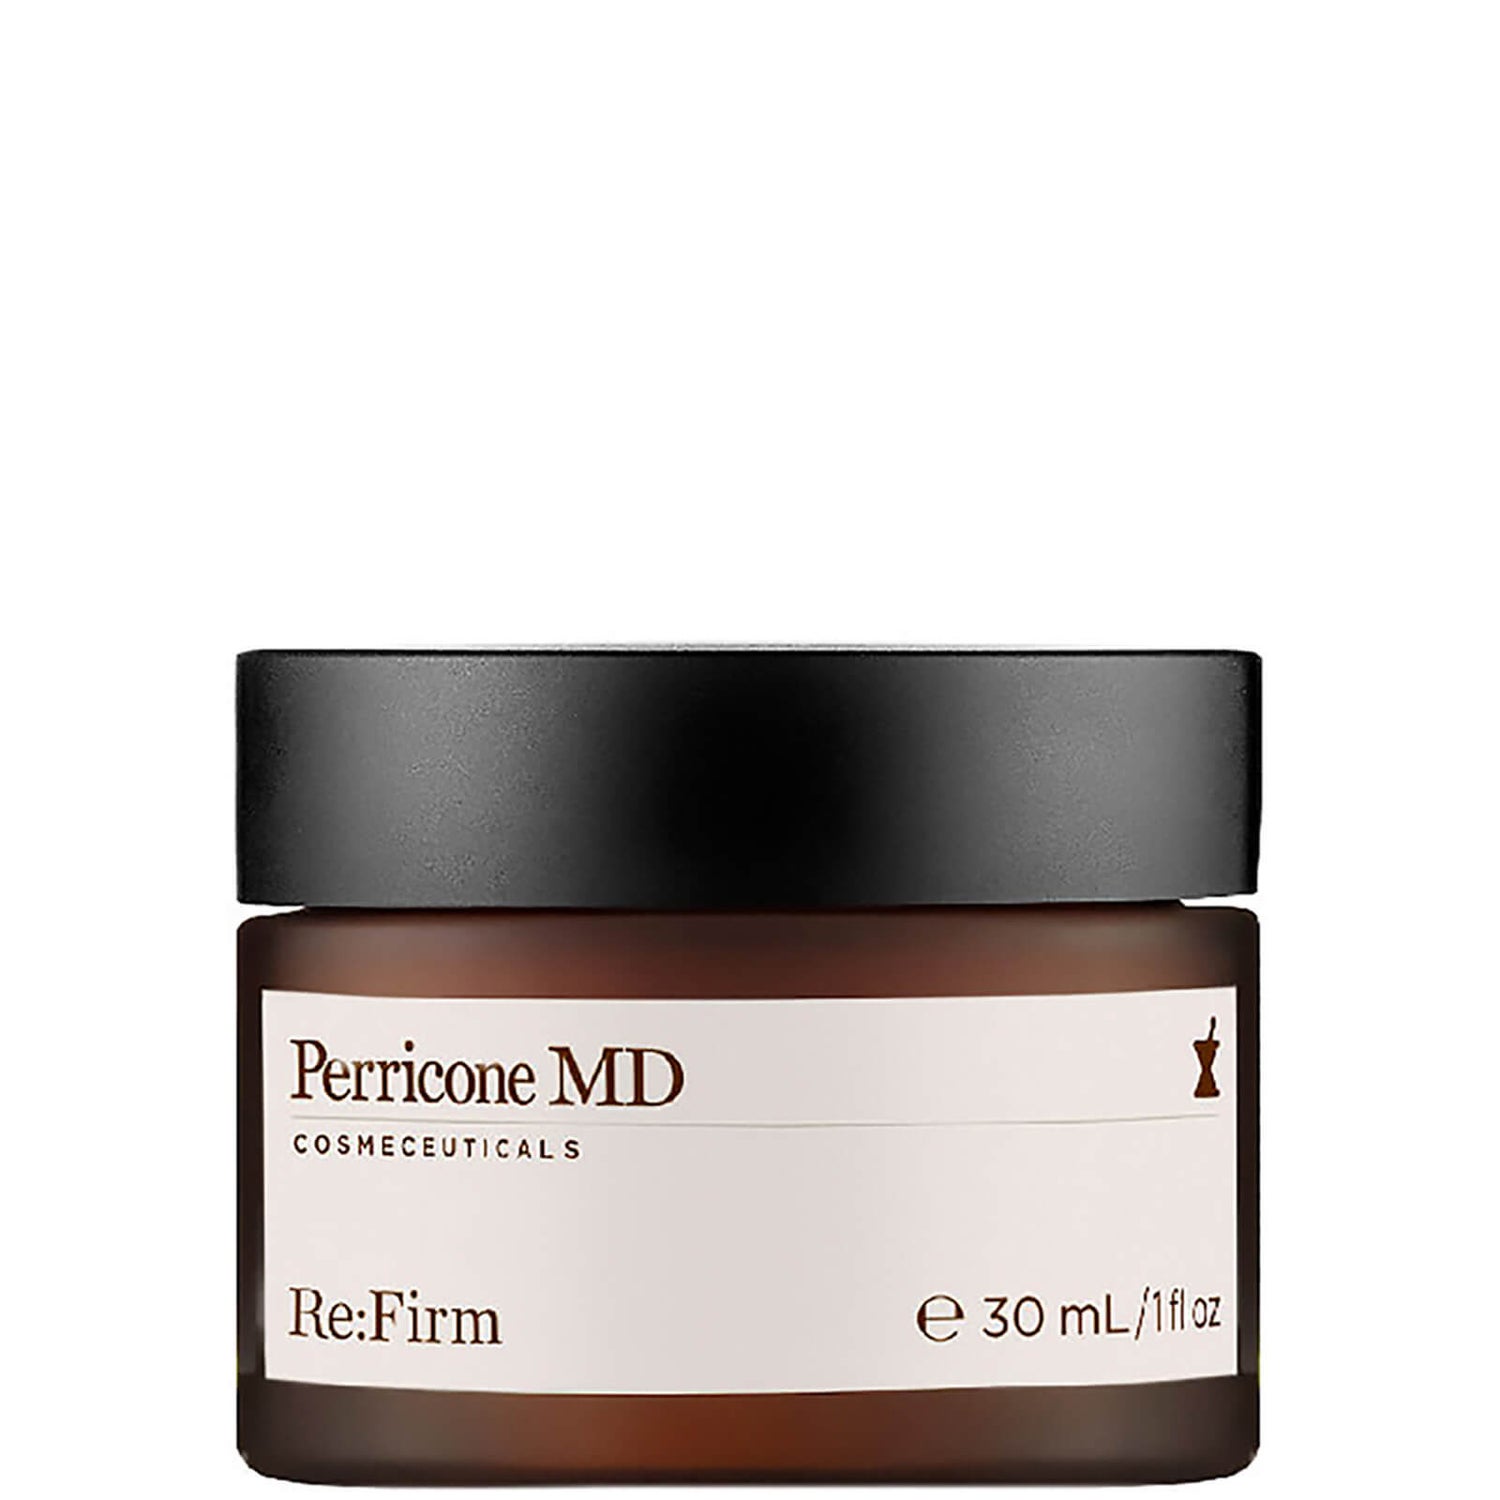 Perricone MD Re:Firm スキン スムージング トリートメント (30ml)